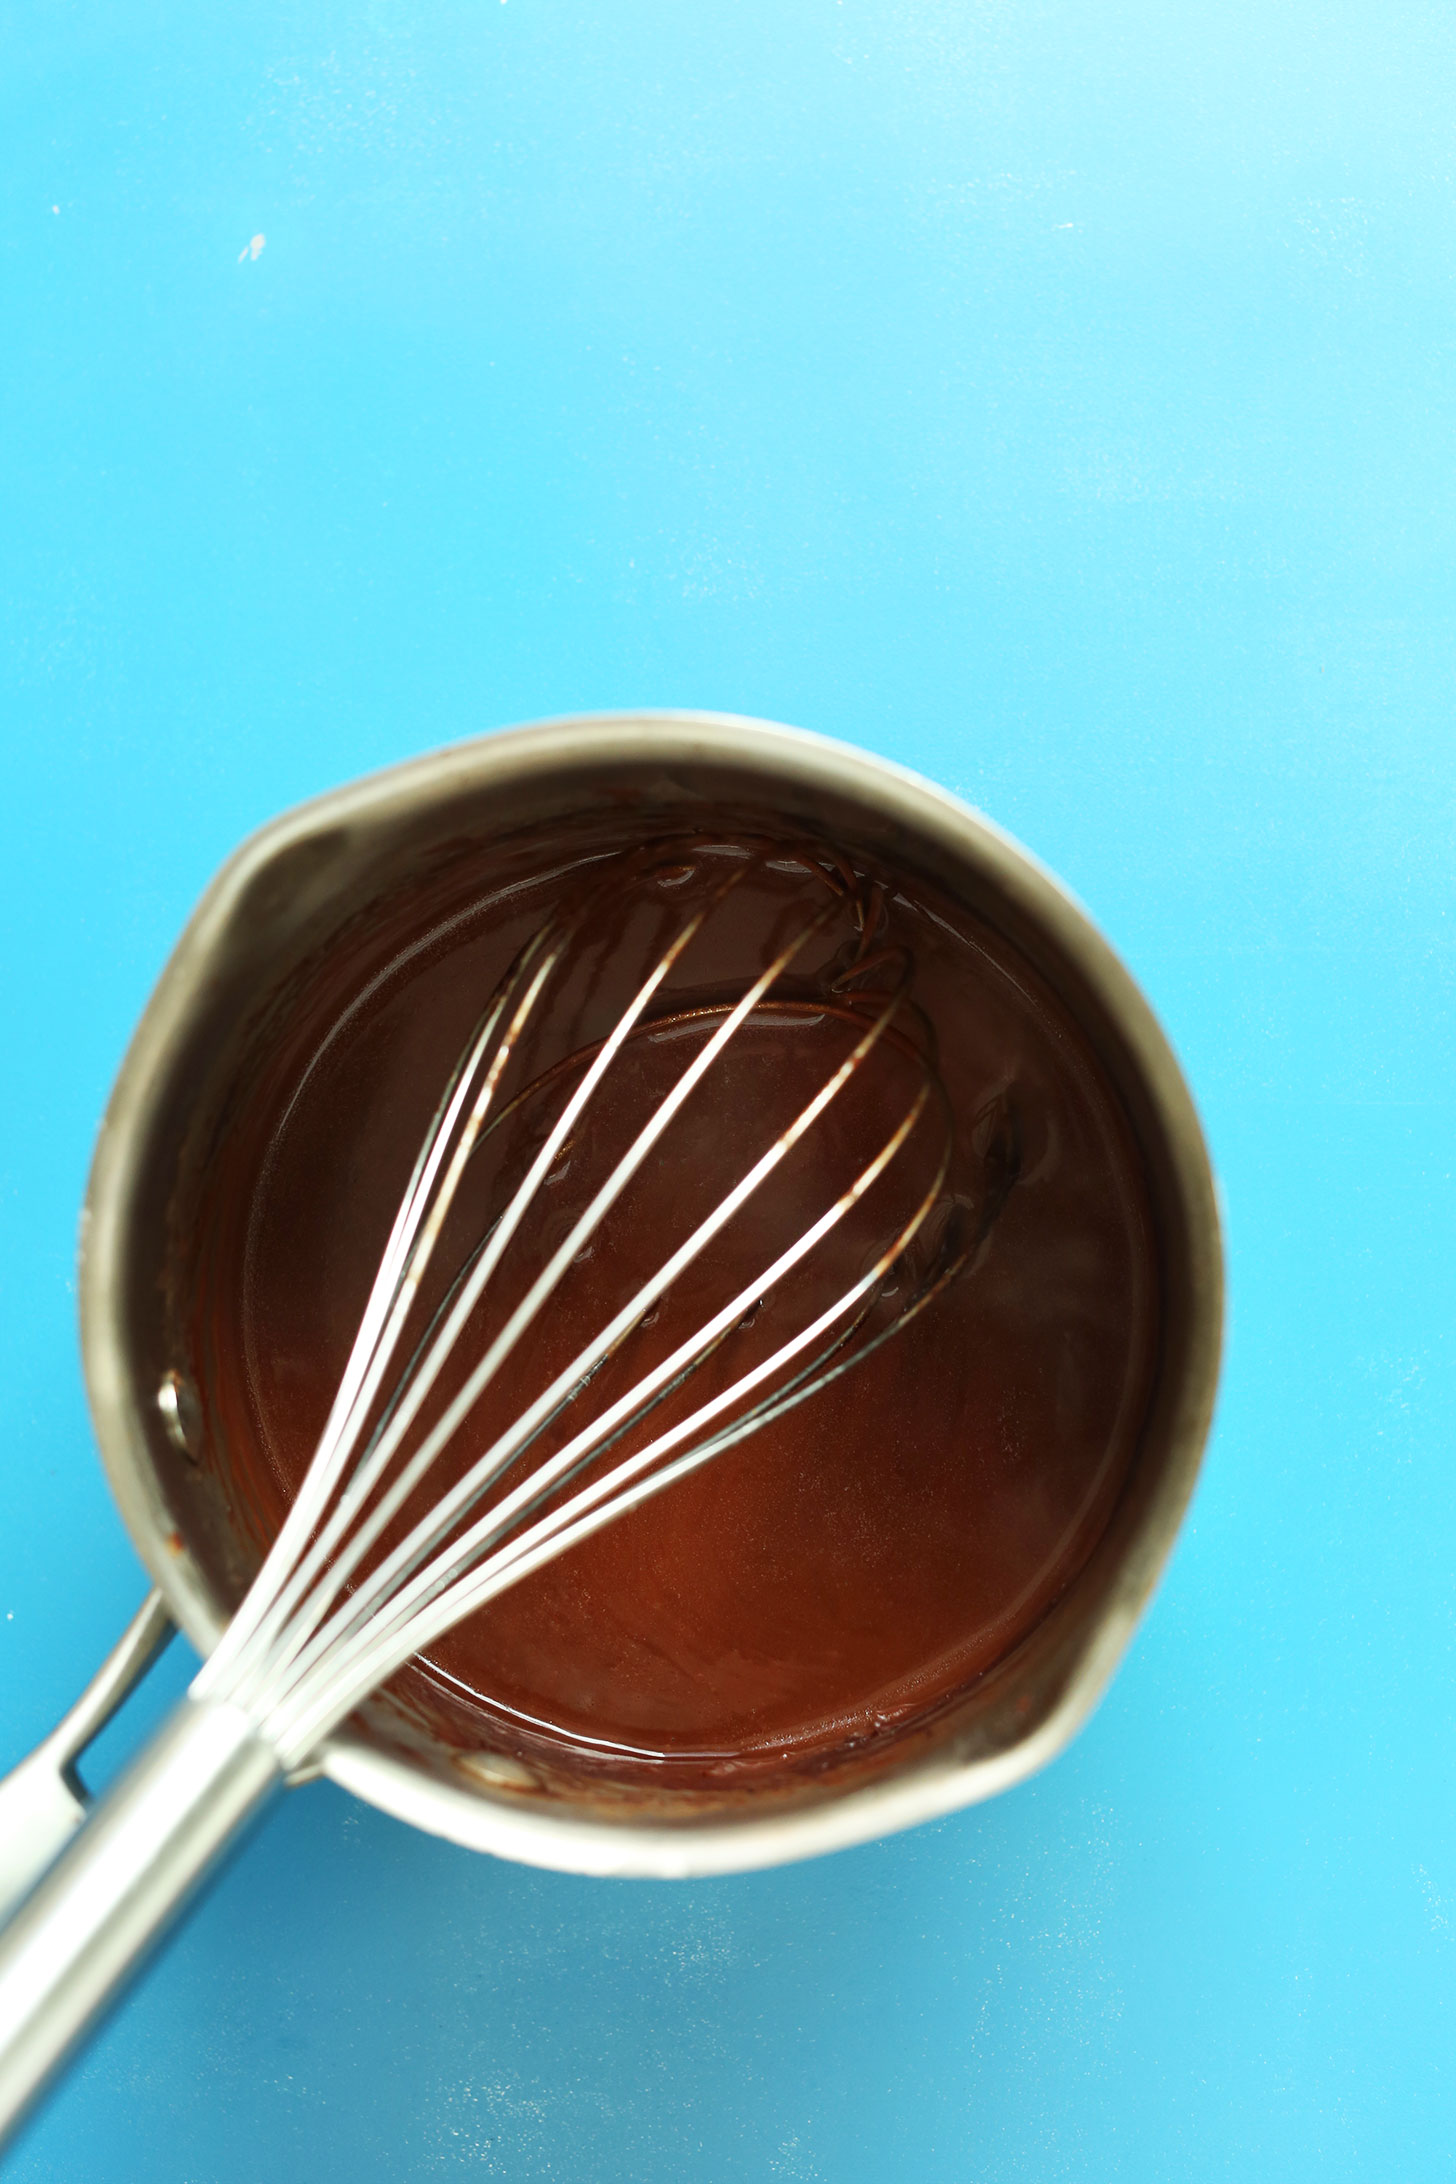 Whisking together ingredients for easy homemade naturally-sweetened chocolate sauce